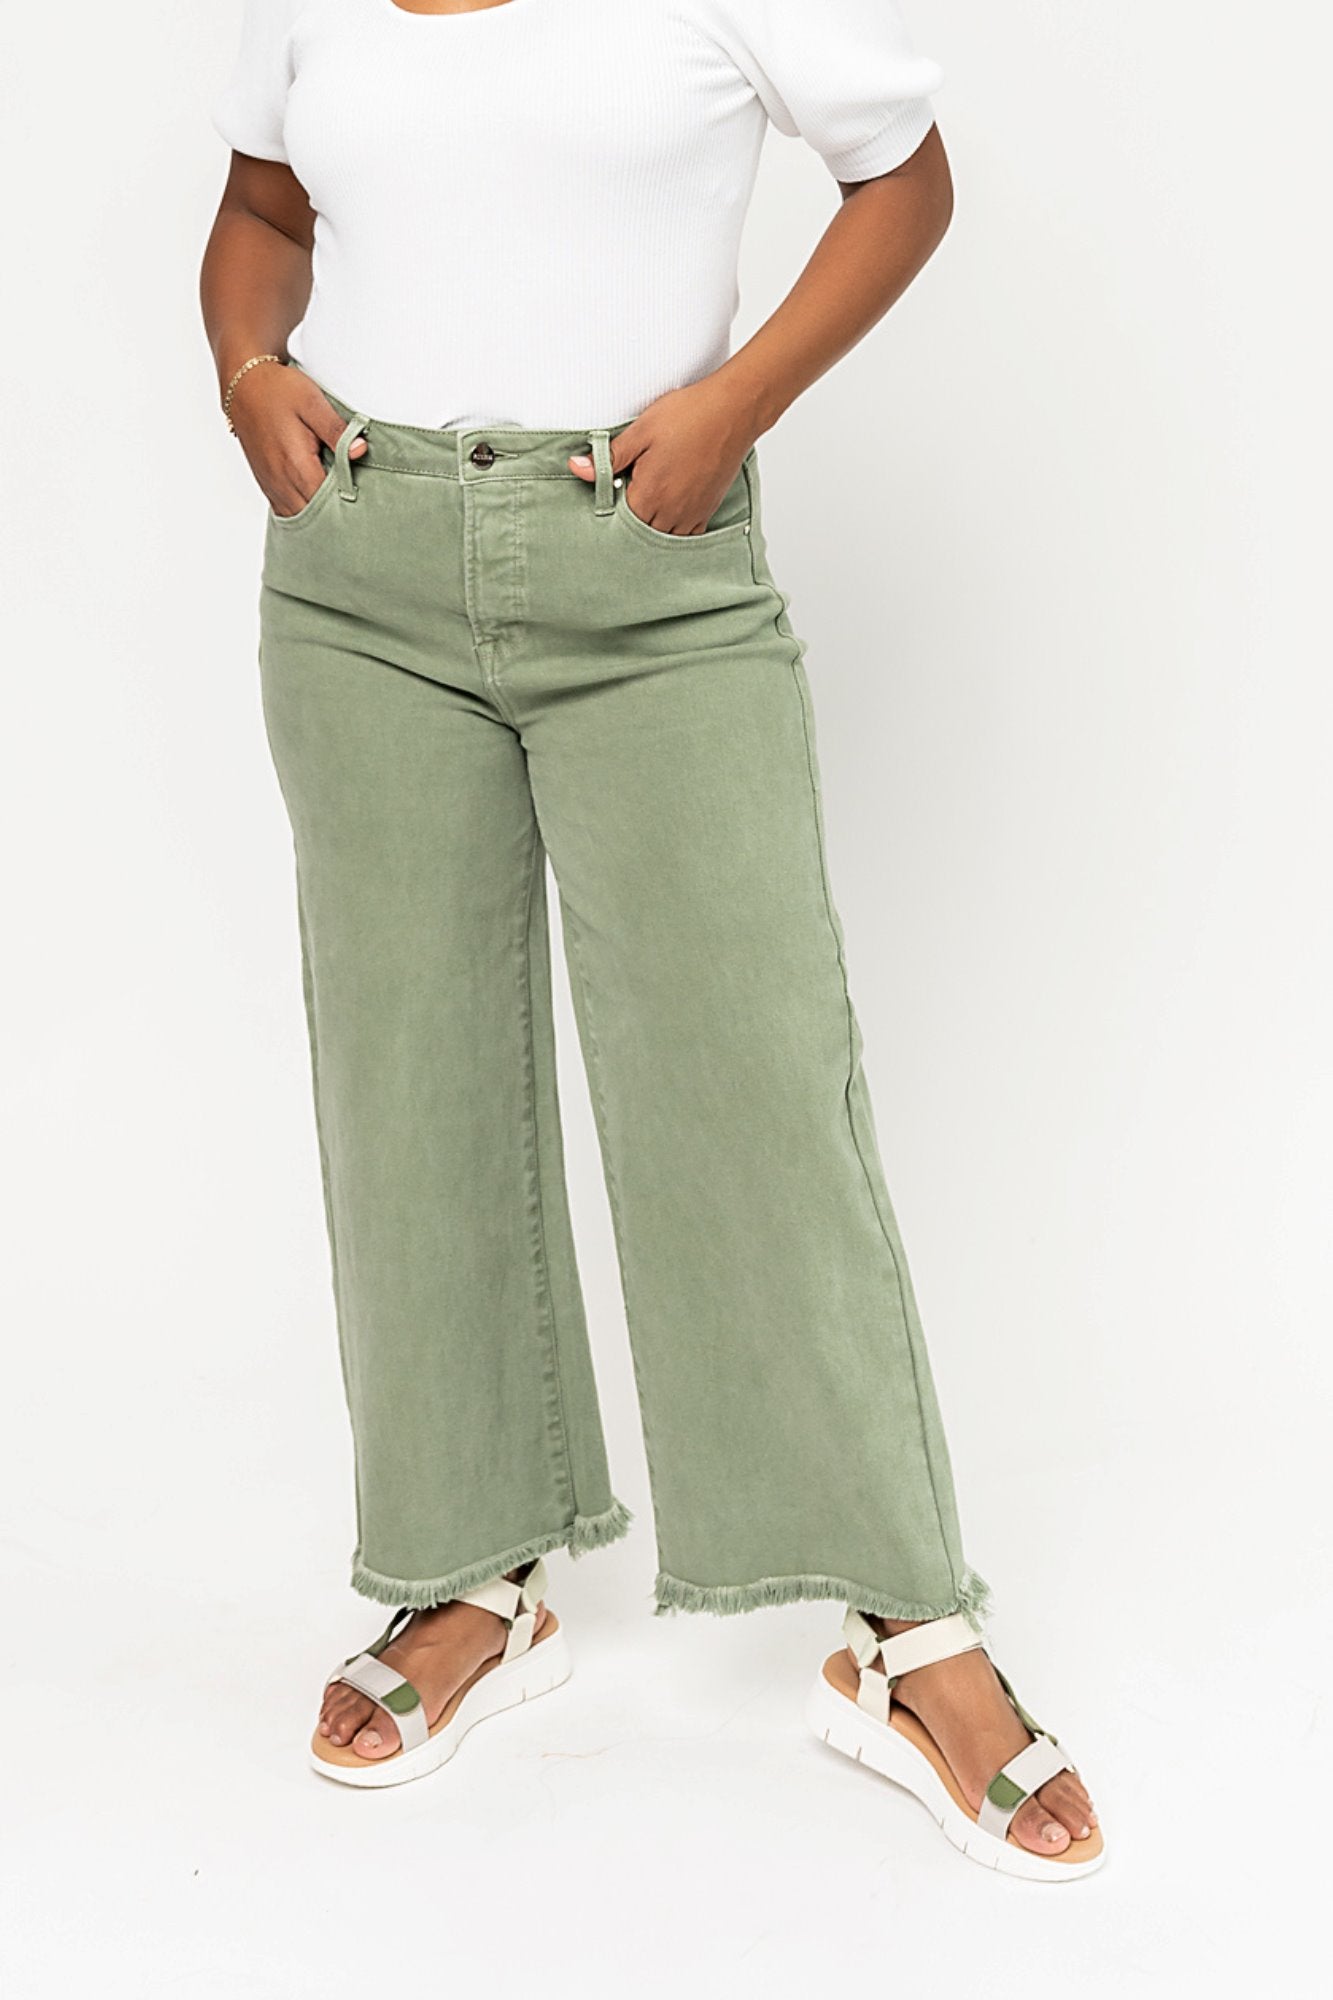 Kenna Jeans in Olive Holley Girl 